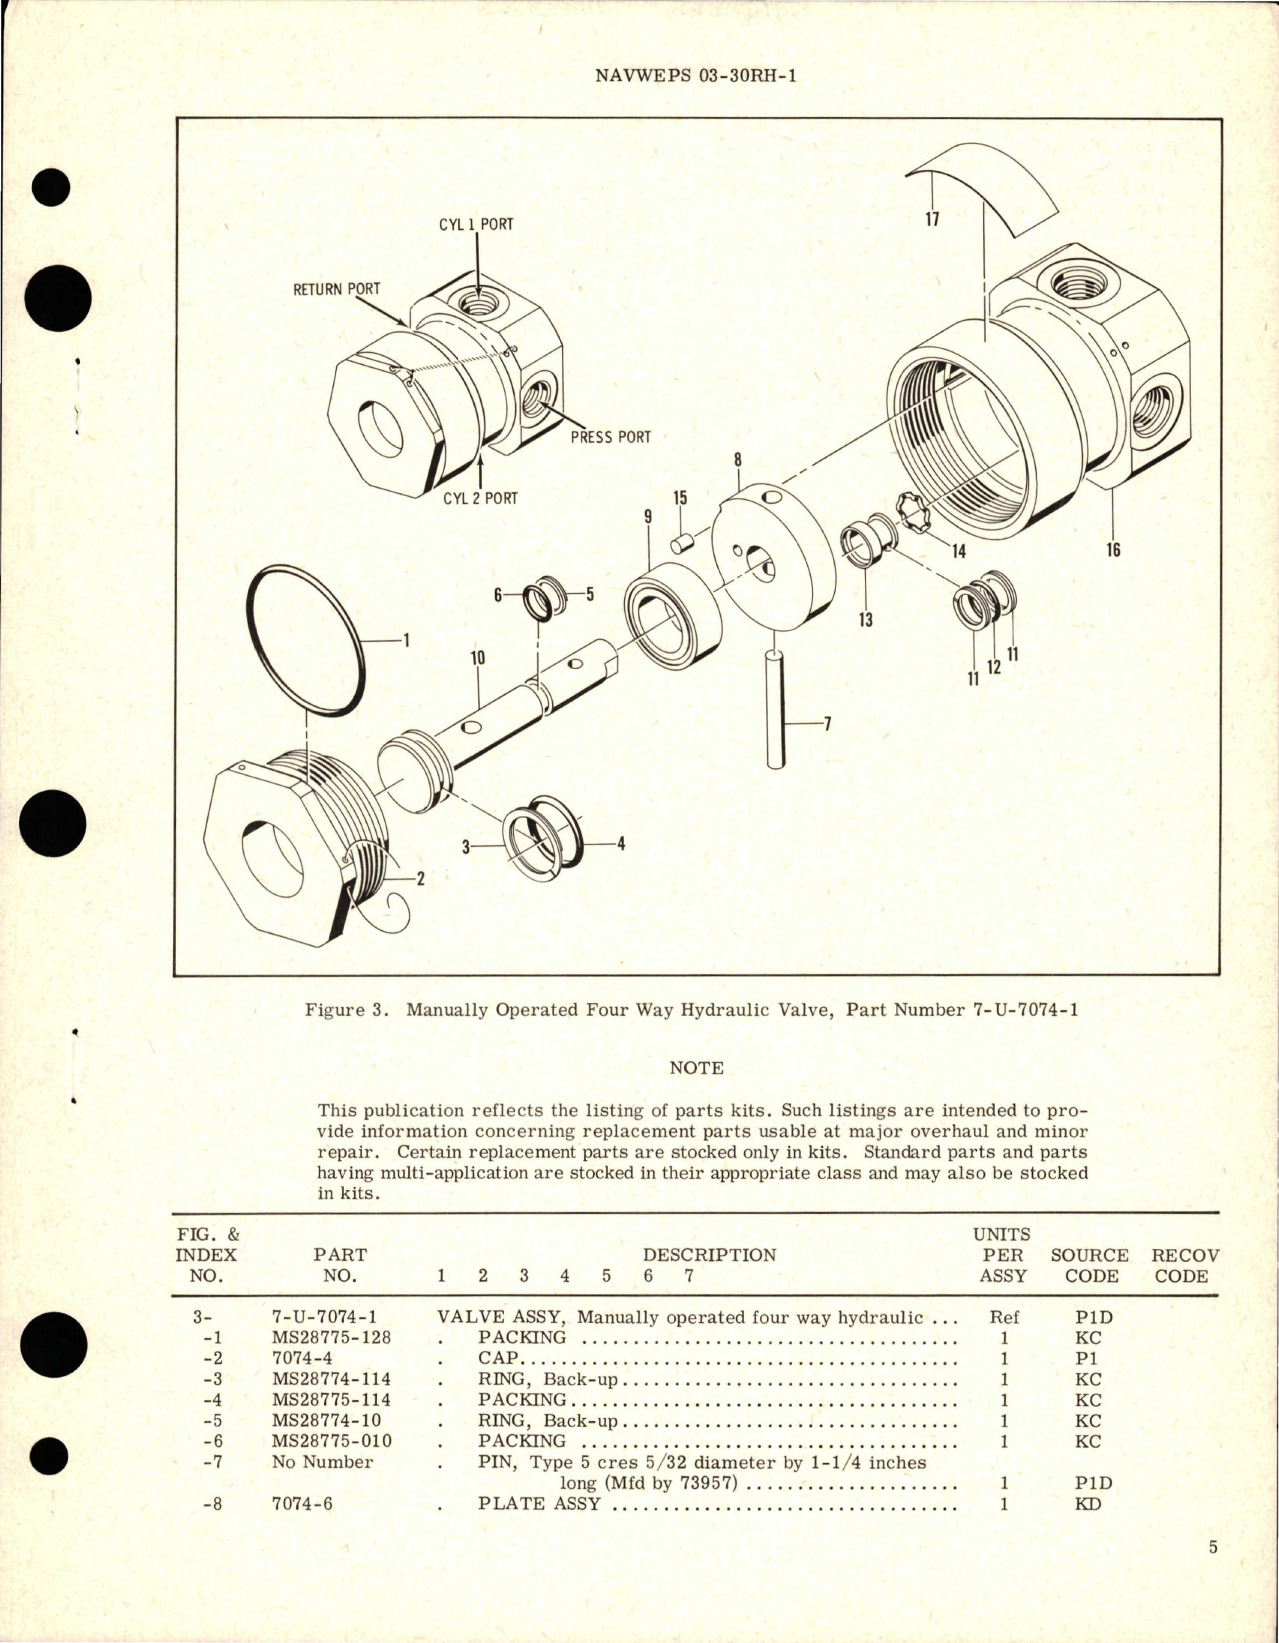 Sample page 5 from AirCorps Library document: Overhaul Instructions with Parts Breakdown for Manually Operated Four Way Hydraulic Valve - Part 7-U-7074-1